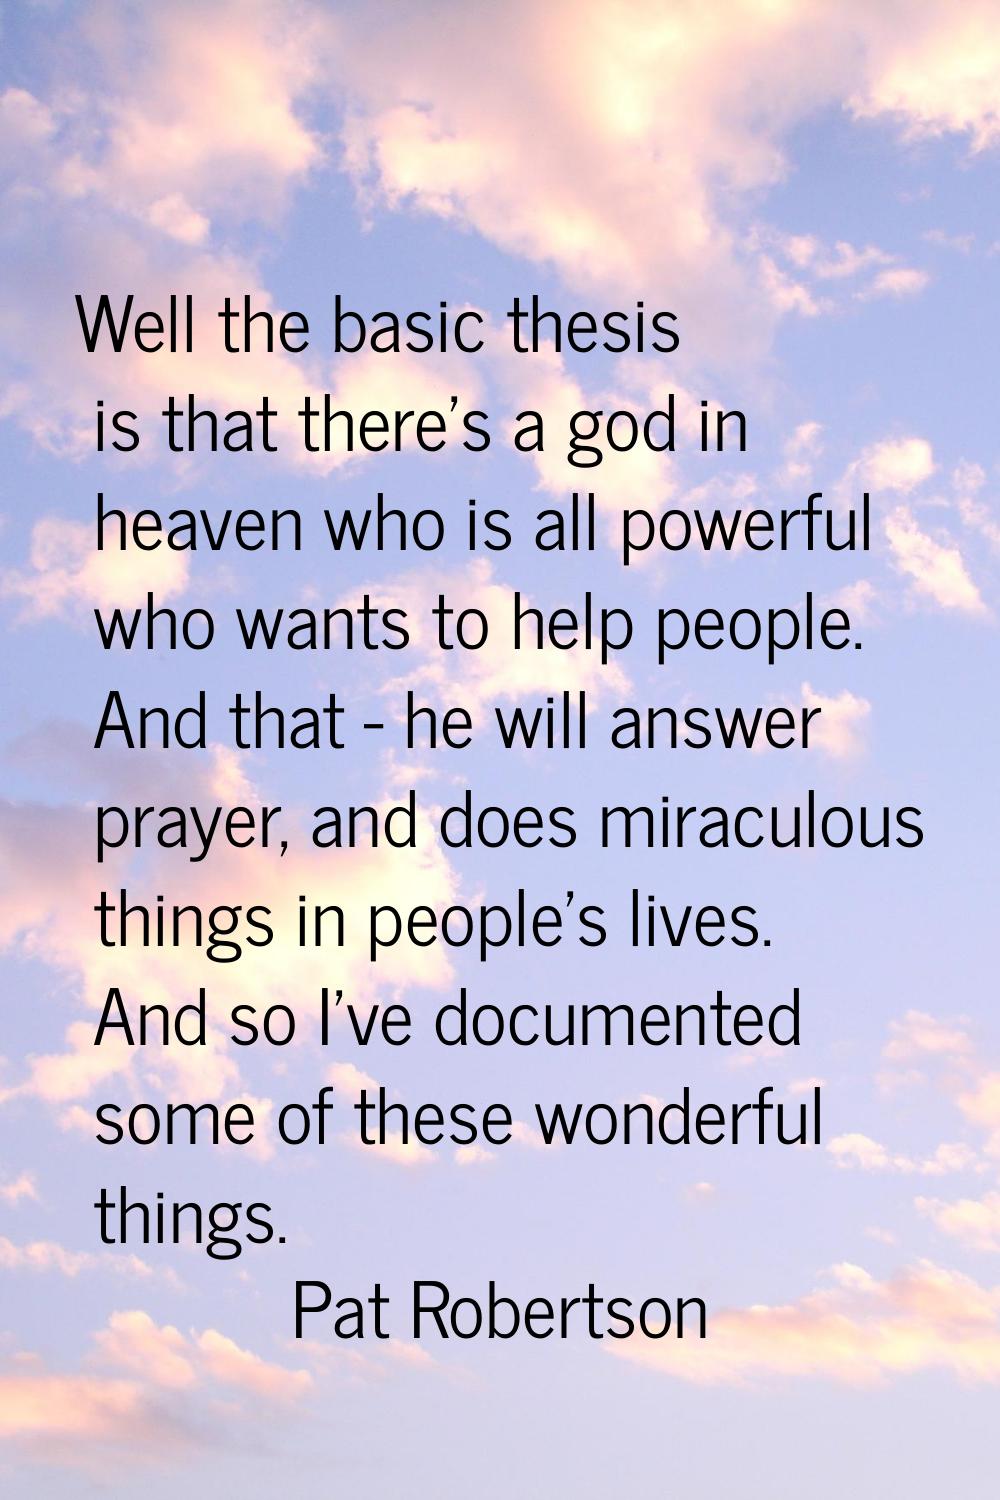 Well the basic thesis is that there's a god in heaven who is all powerful who wants to help people.